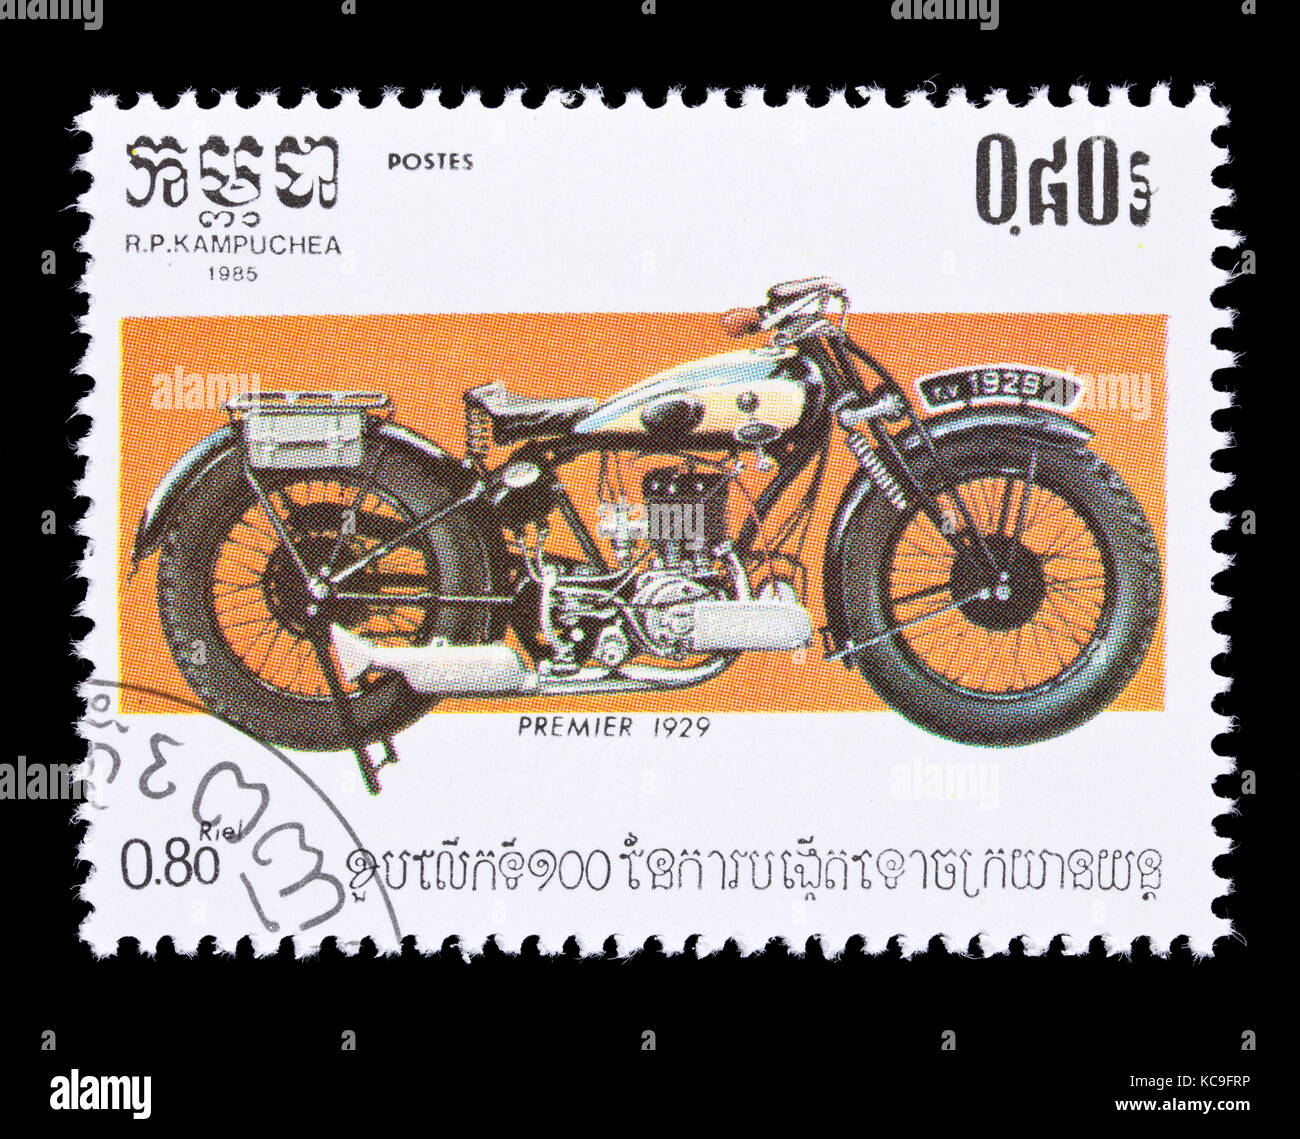 Postage stamp from Cambodia (Kampuchea) depicting a 1929 Premier motorcycle Stock Photo